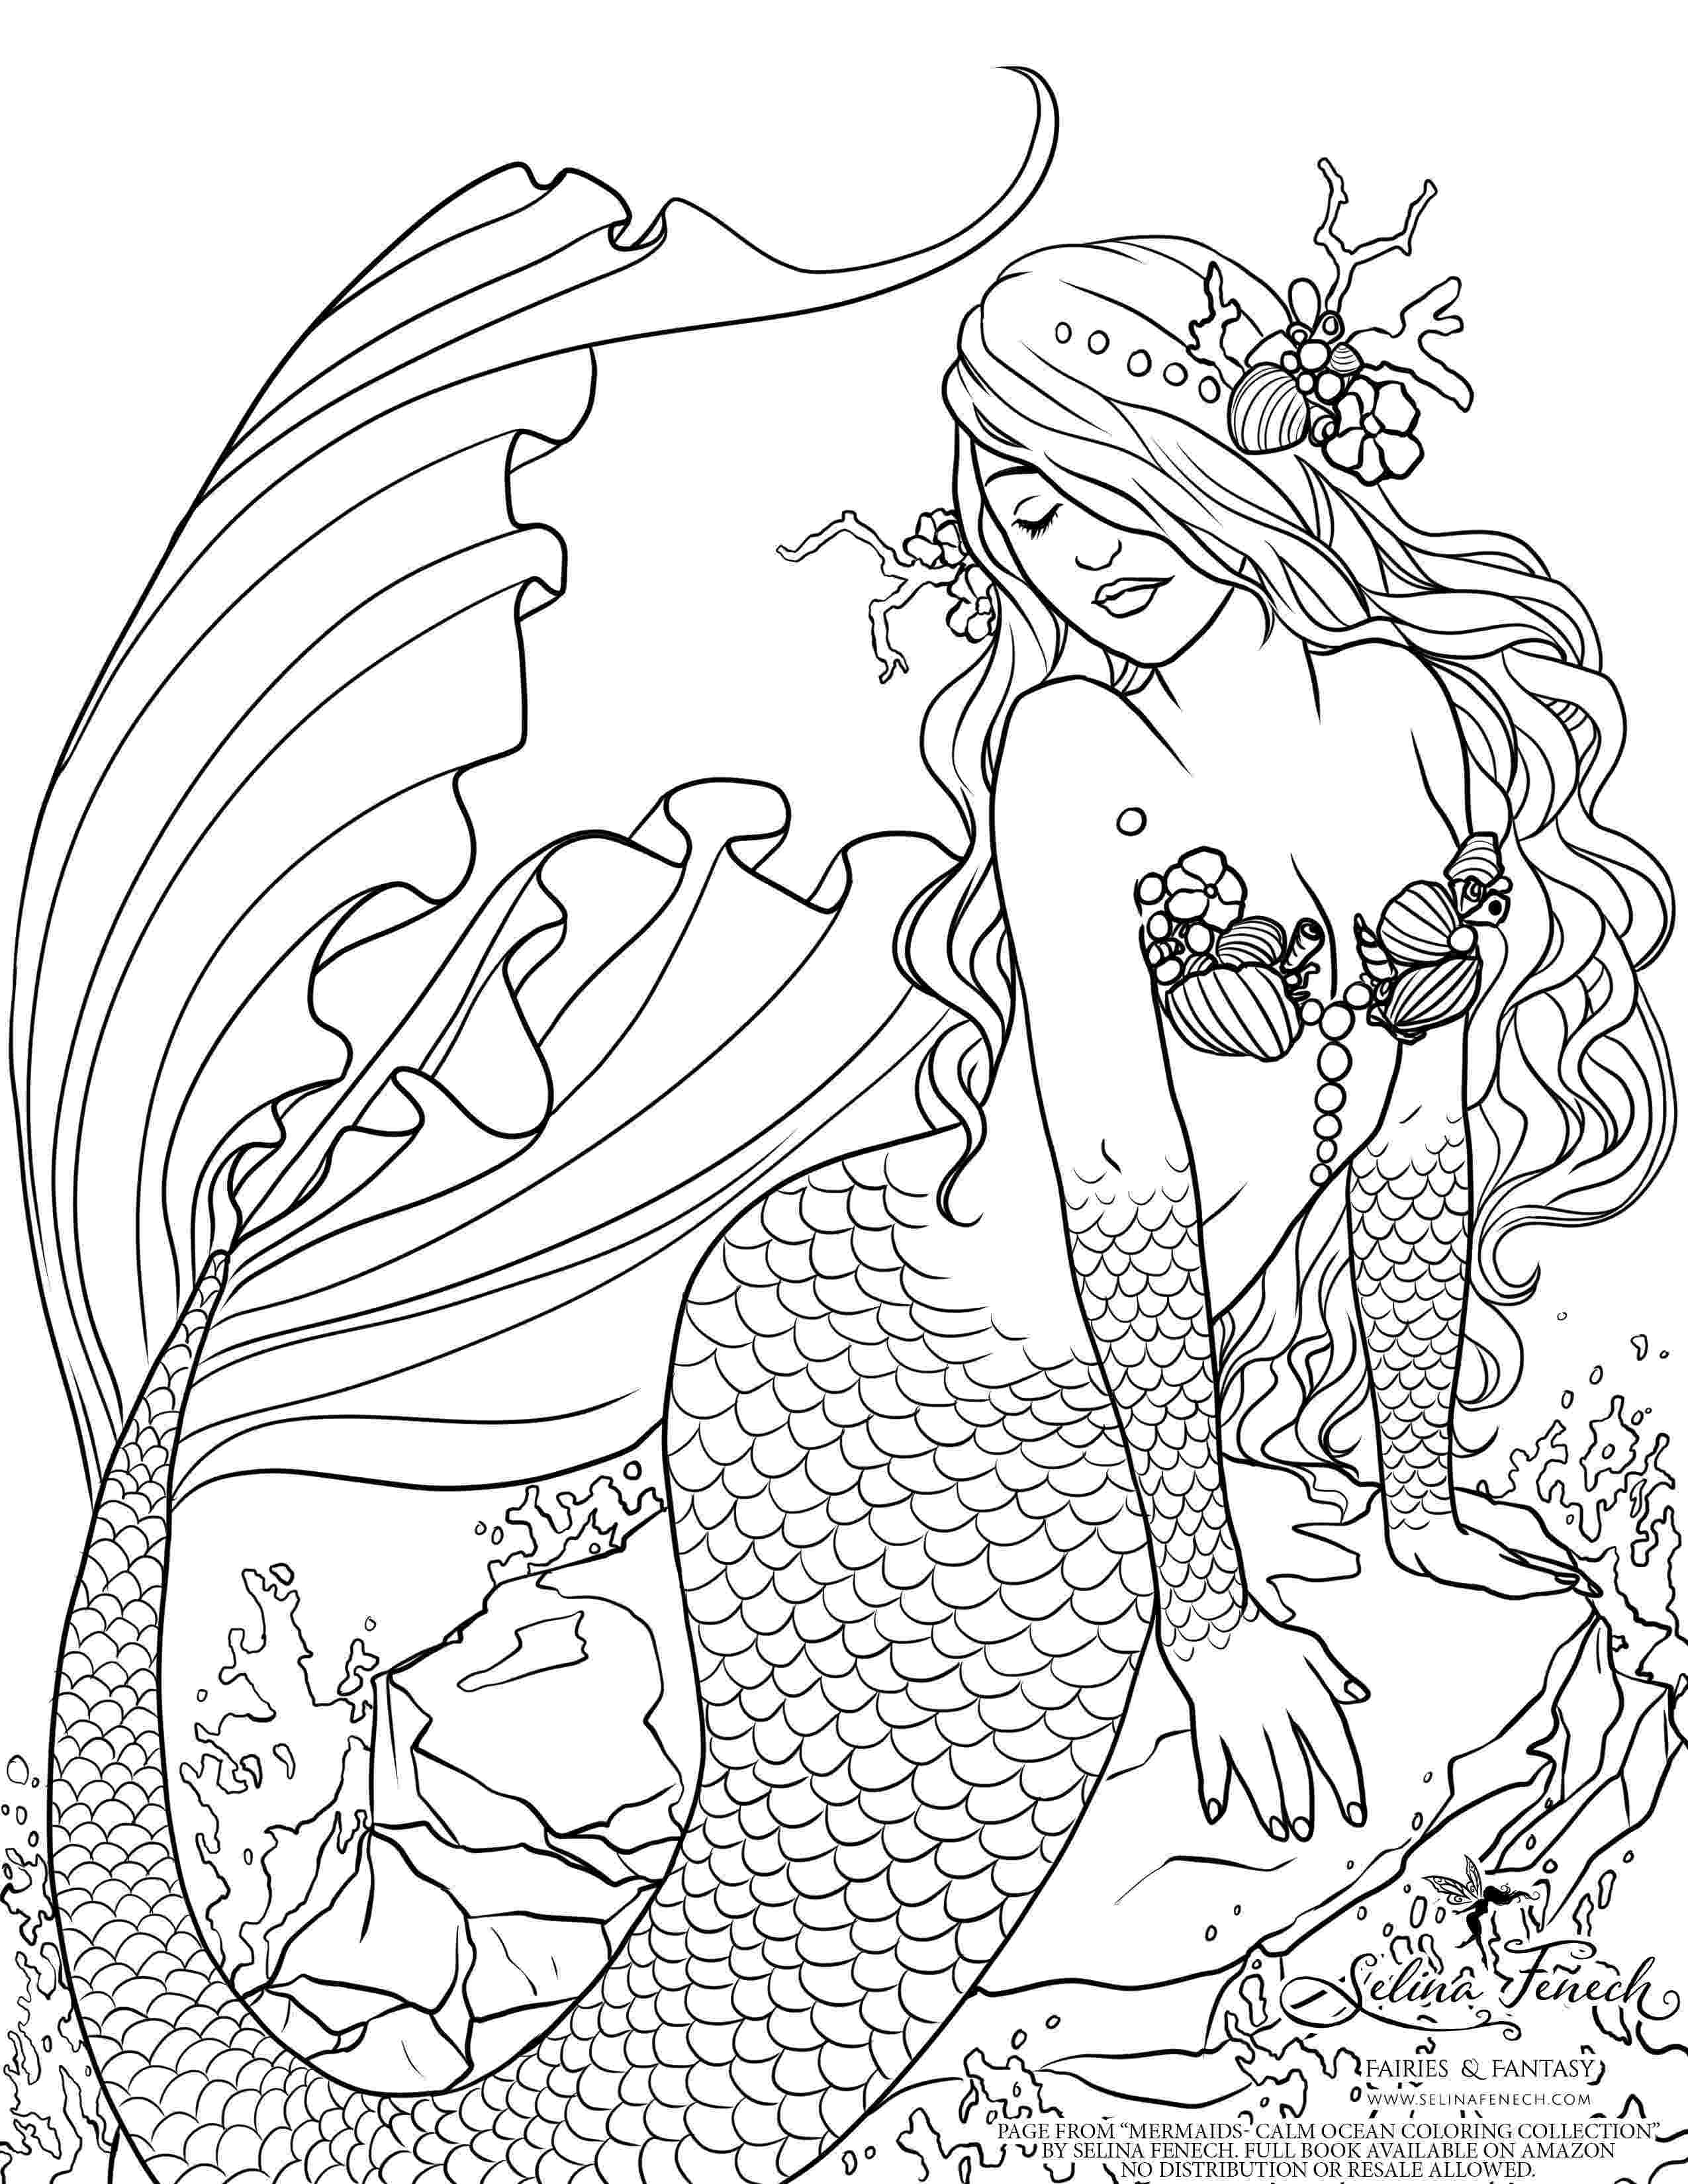 colouring pages for mermaids mermaid colouring page by selina fenech shared by her mermaids pages for colouring 